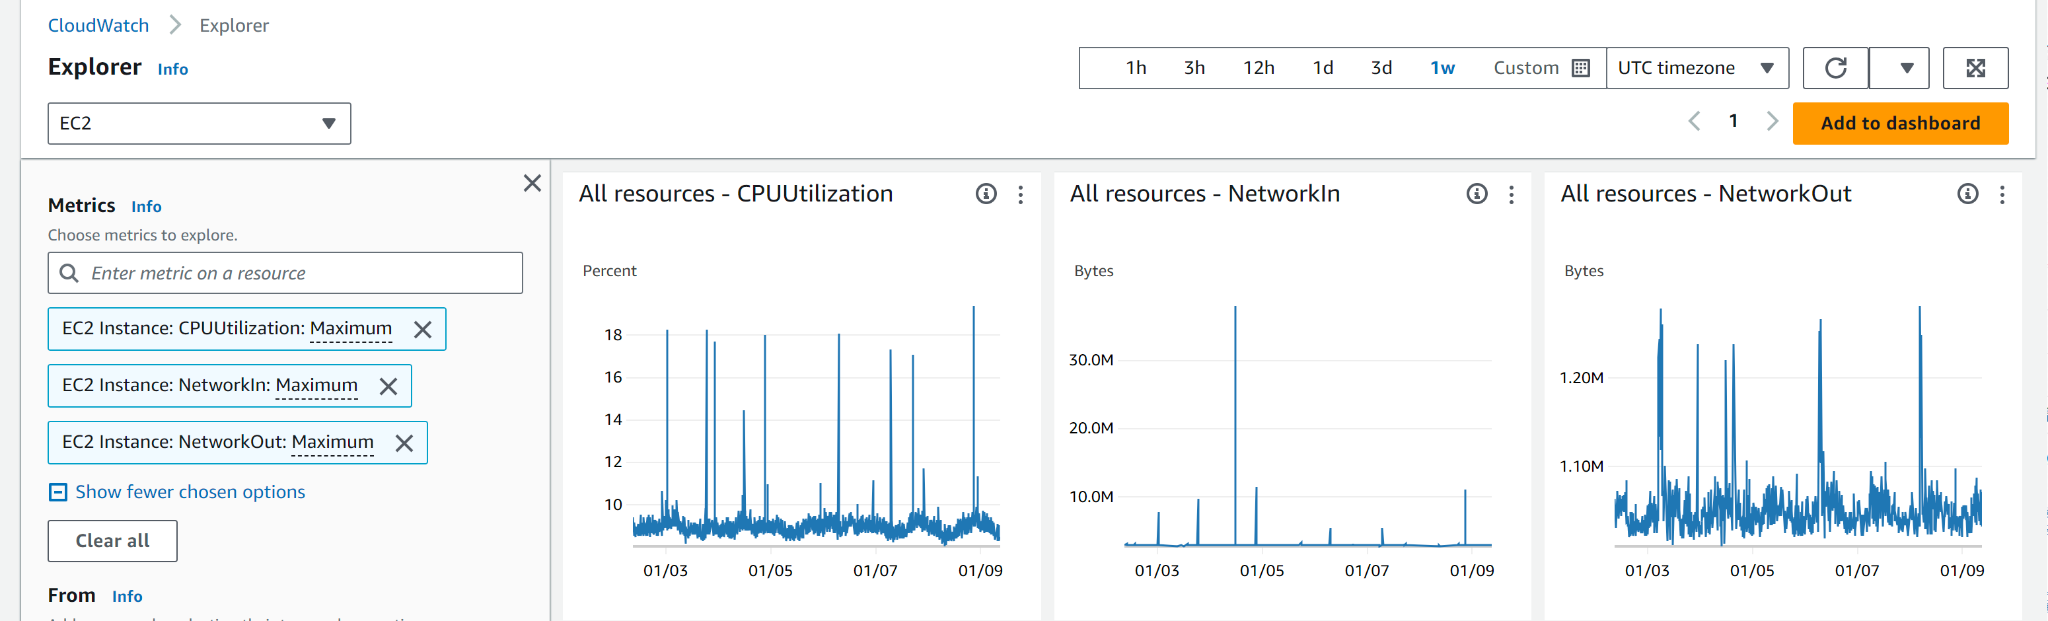 CloudWatch metrics covering one week of usage